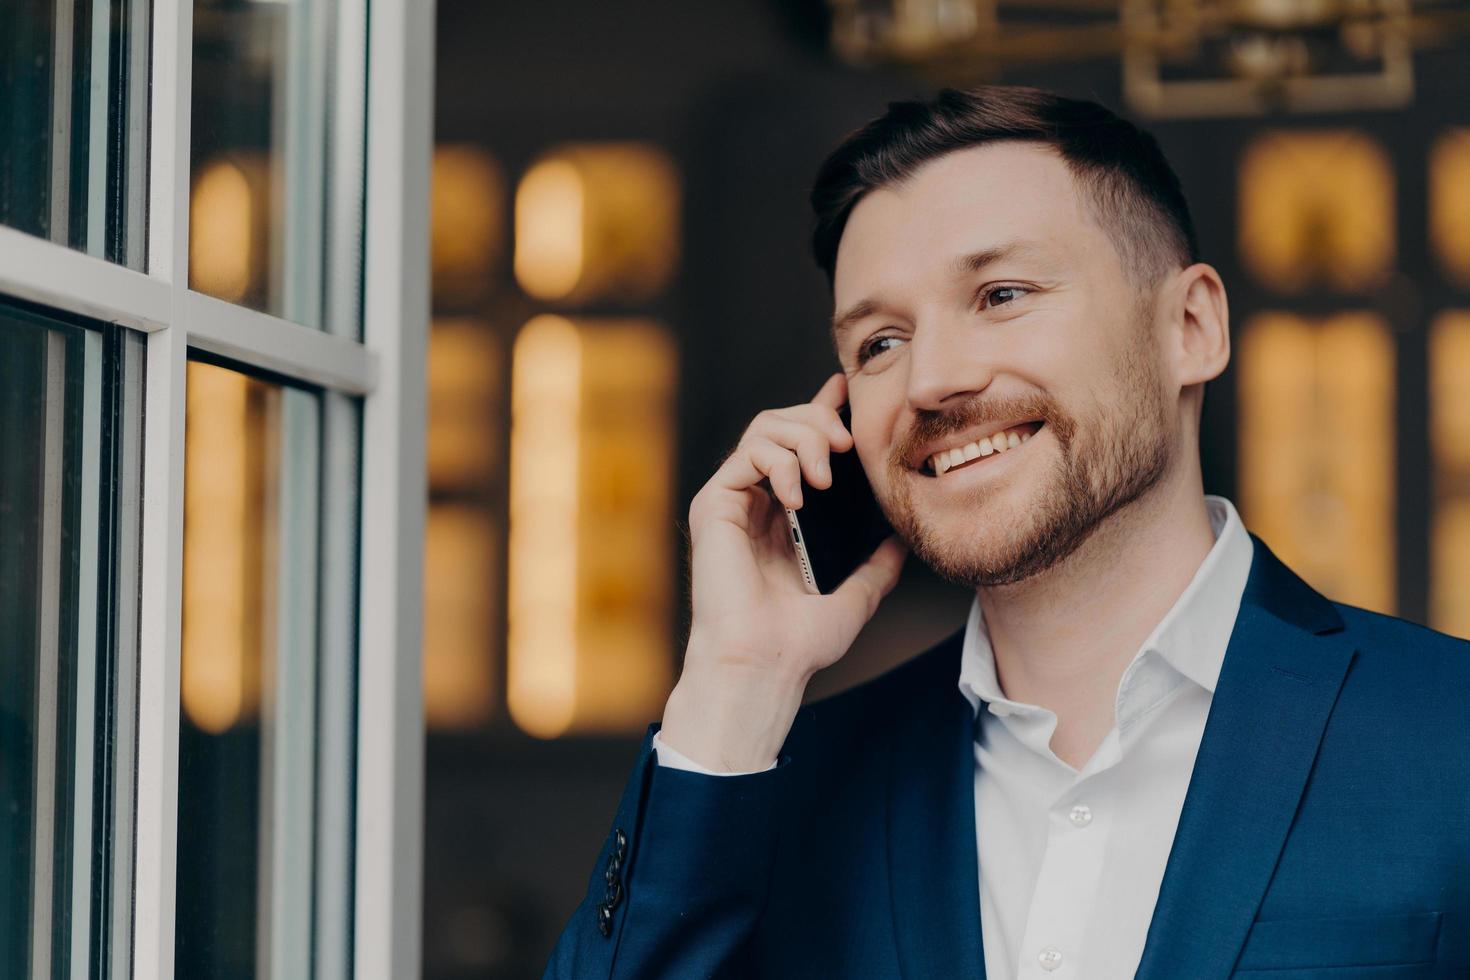 Mobile call. Handsome male executive manager with bristle has telephone conversation enjoys modern communication smiles happily looks thoughtfully into distance wers white shirt and elegant suit photo